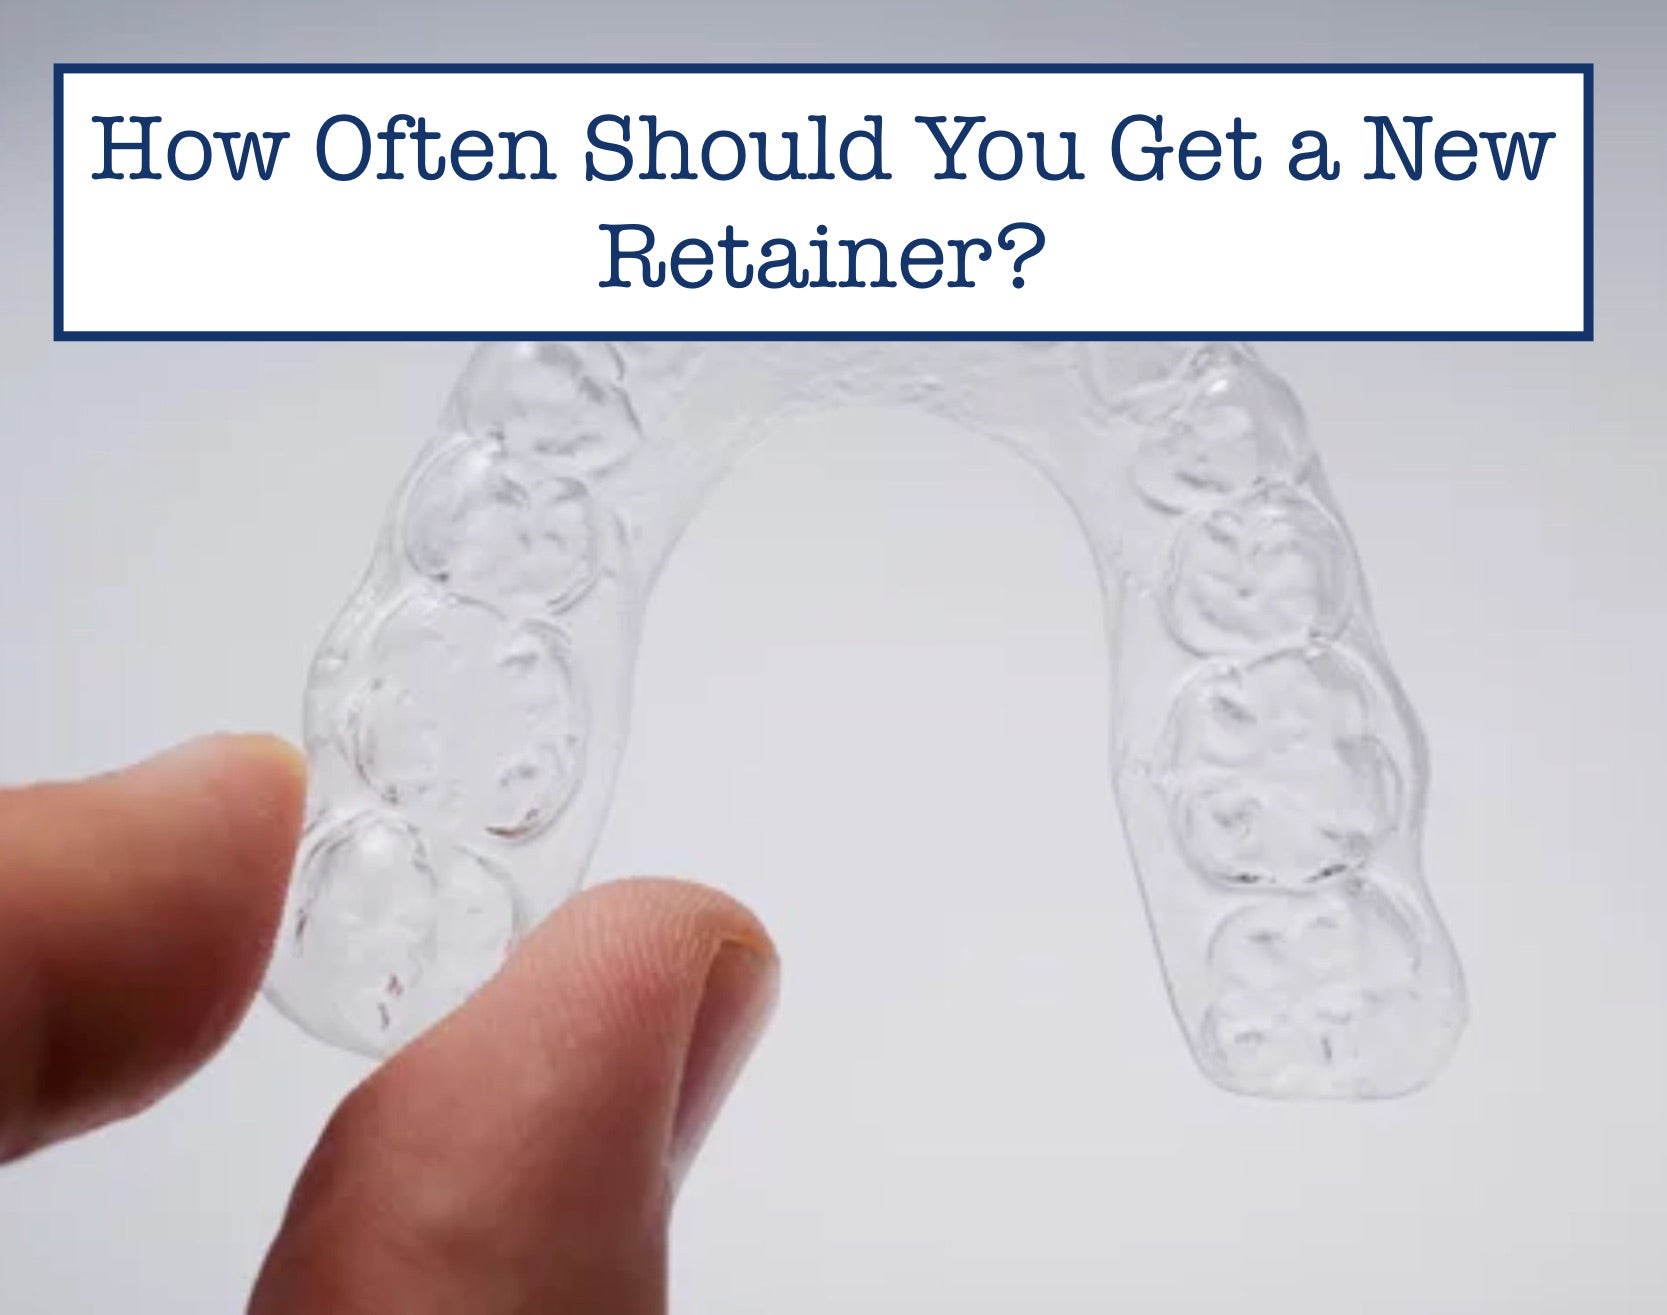 How Often Should You Get a New Retainer?